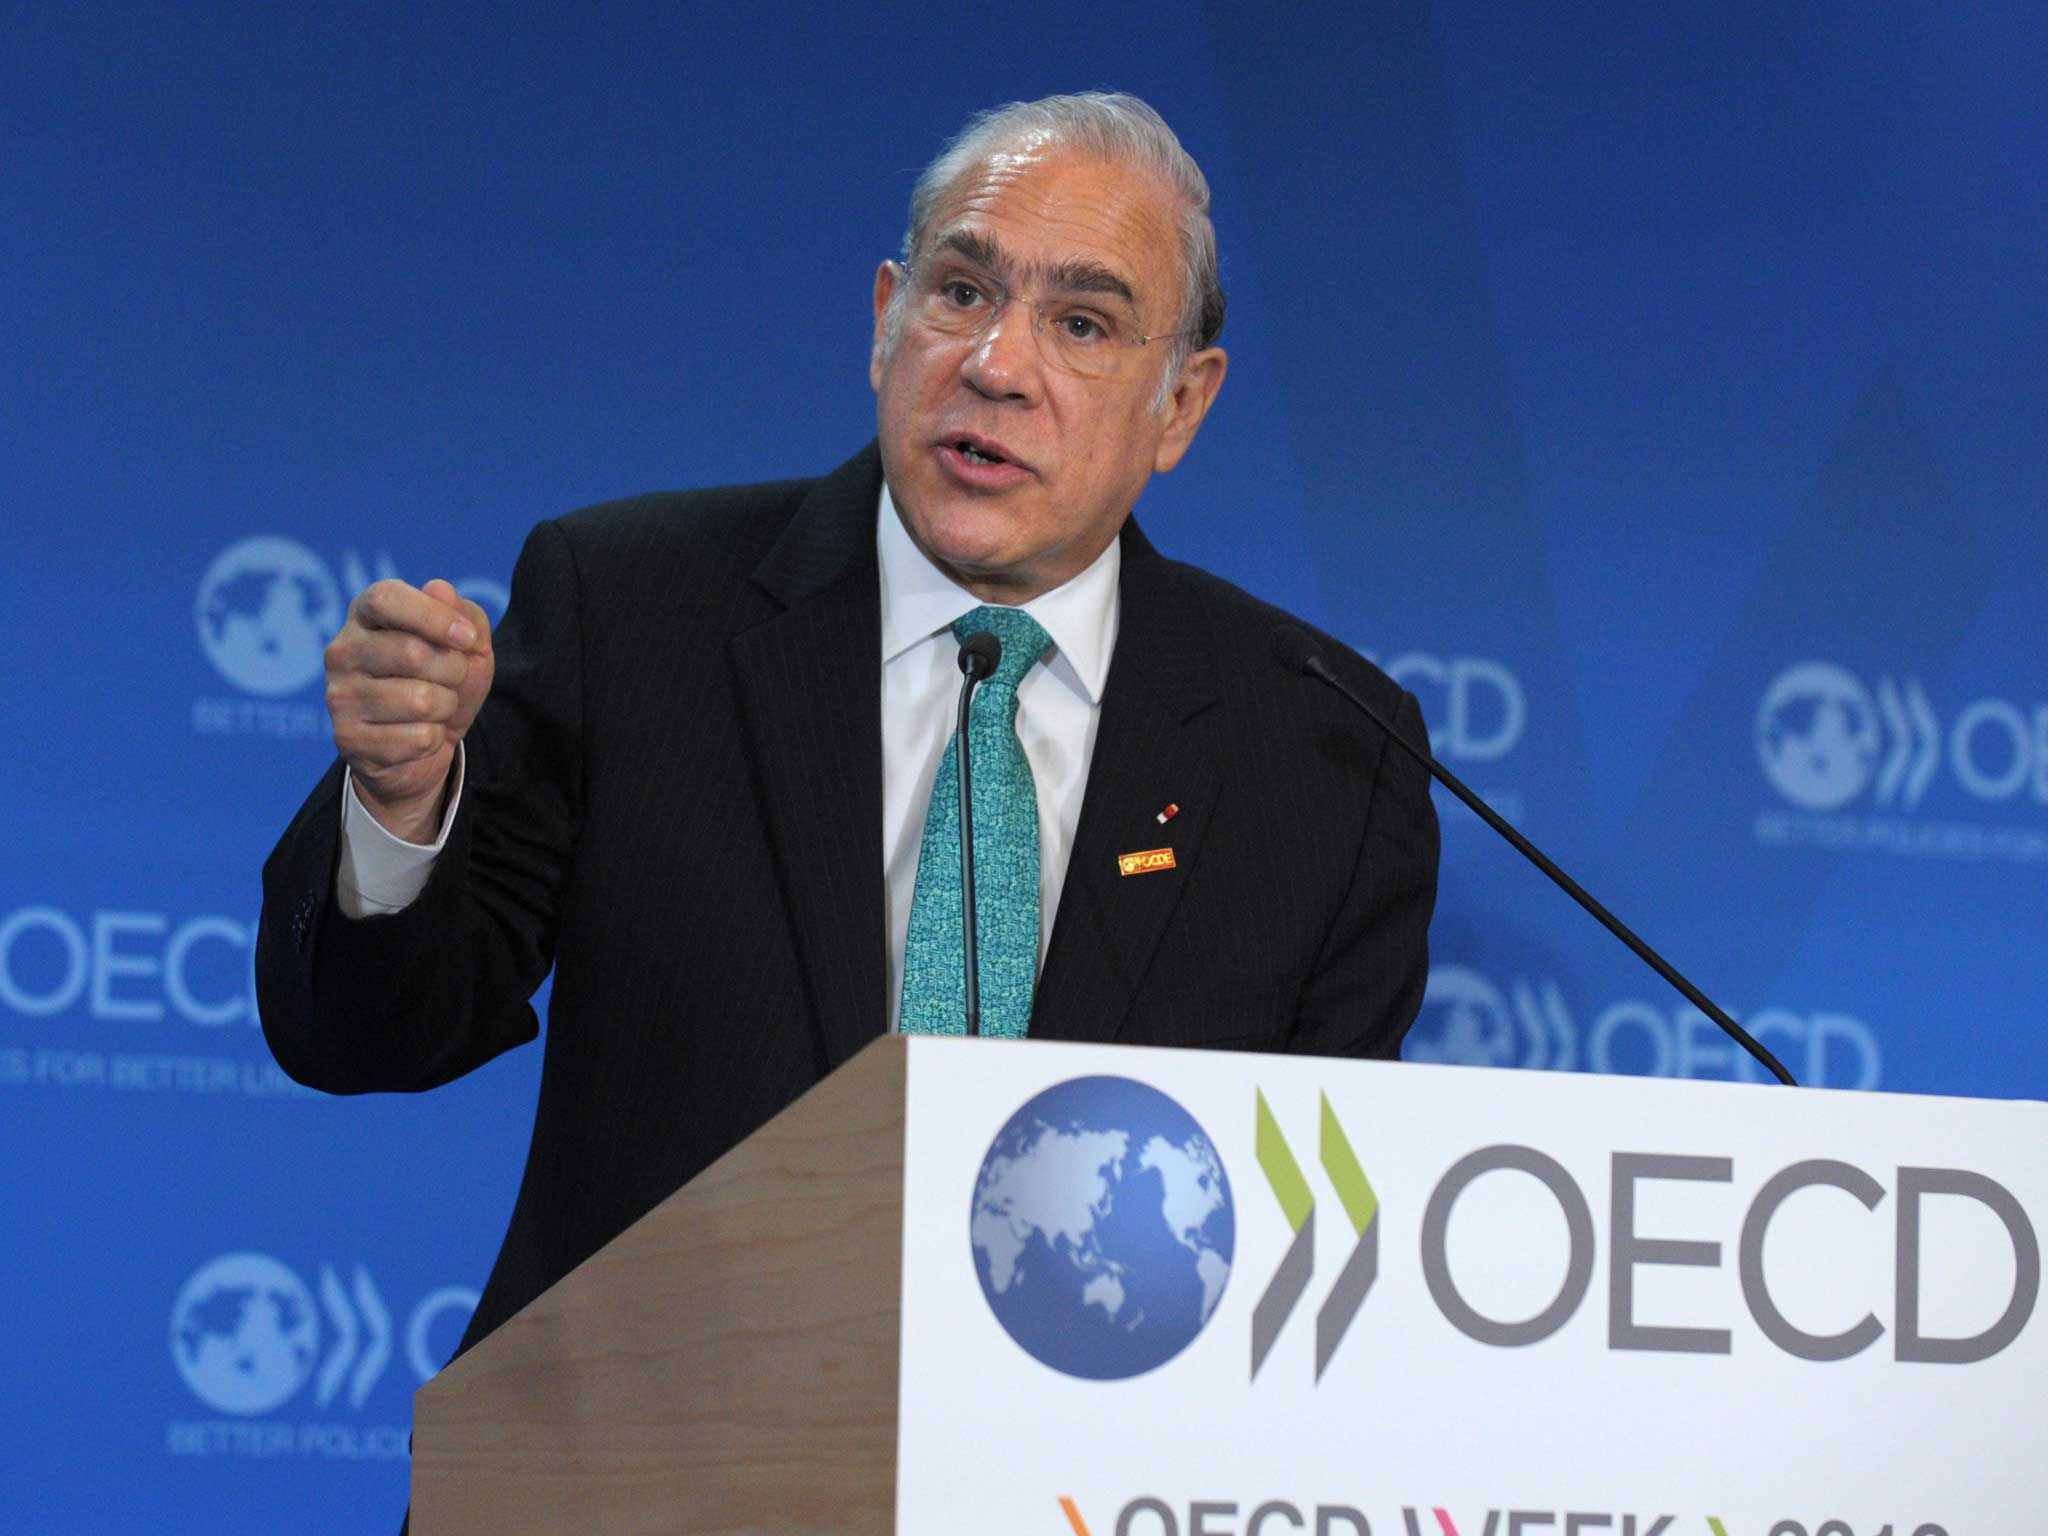 OECD Secretary General Angel Gurria talks while presenting the Economic Outlook during the OECD Week